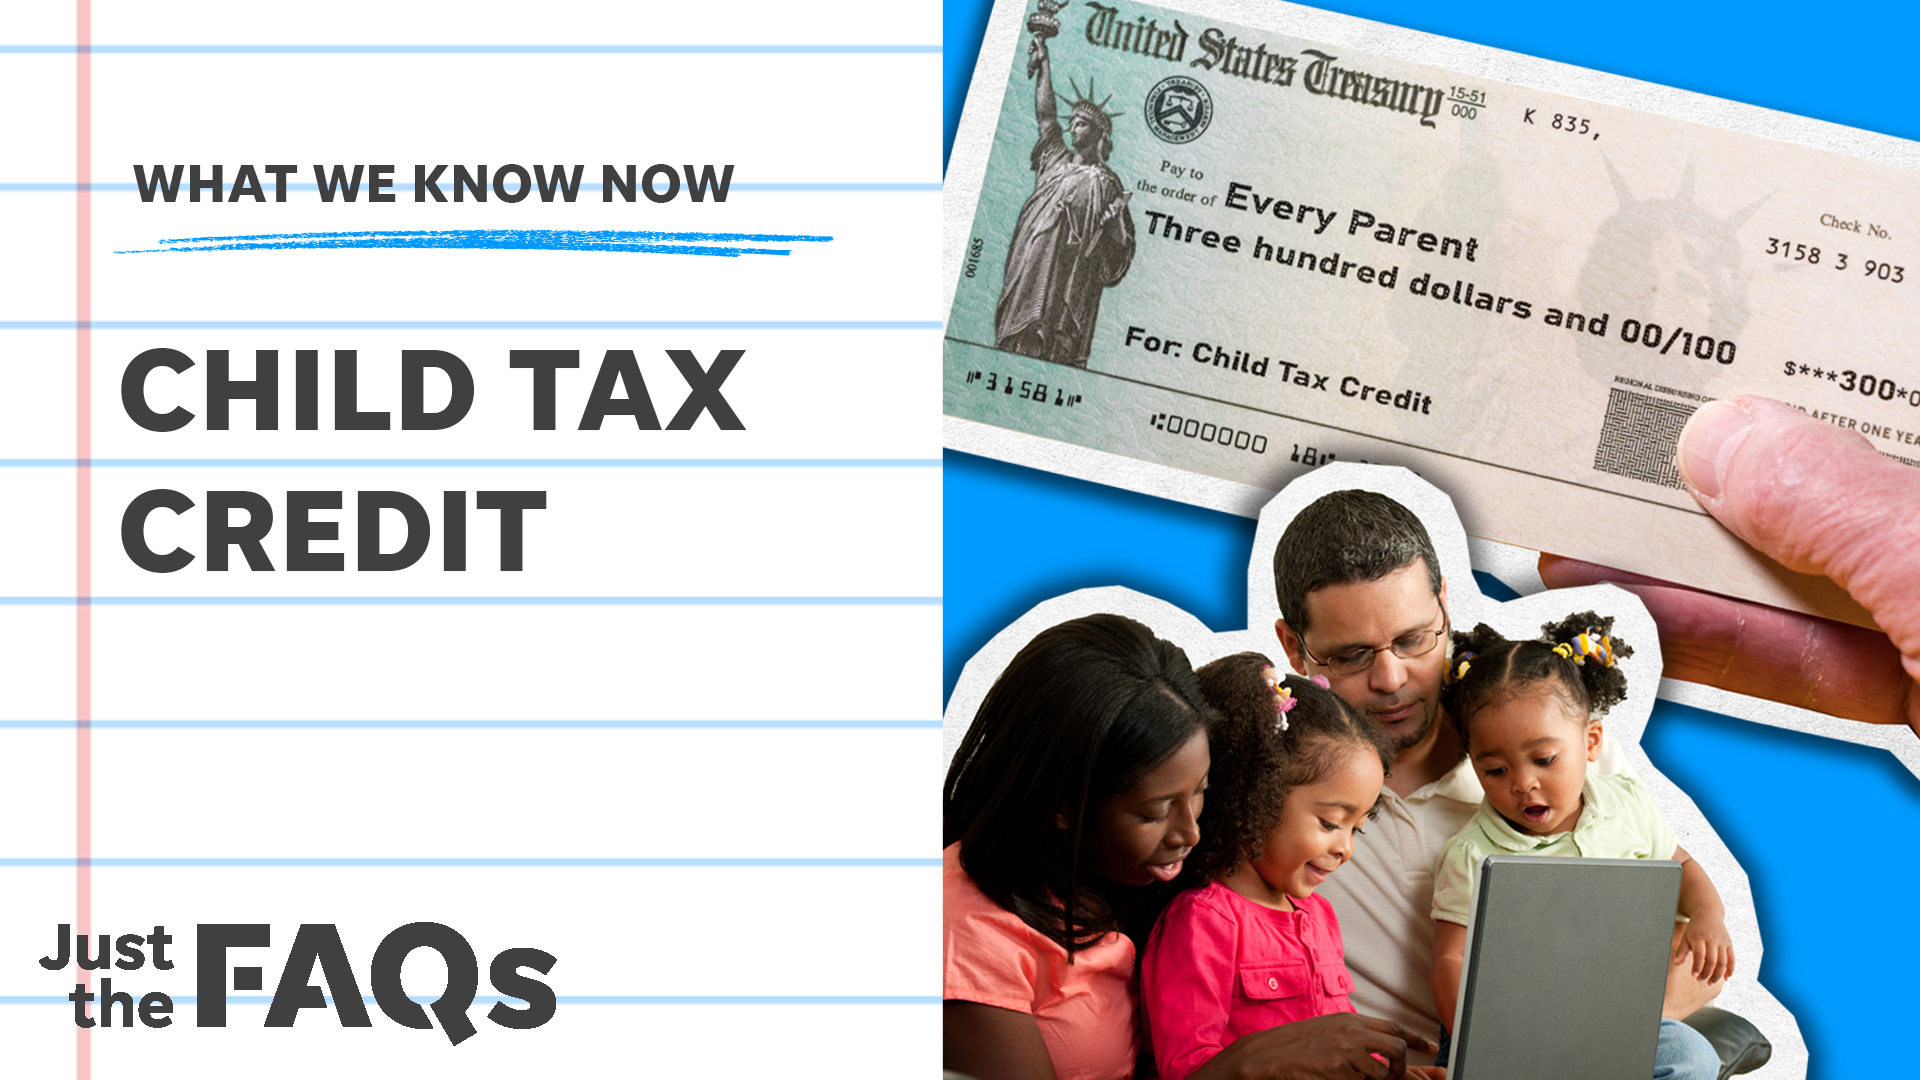 Child Tax Credit California sends checks of at least $600 to two thirds of Residents!